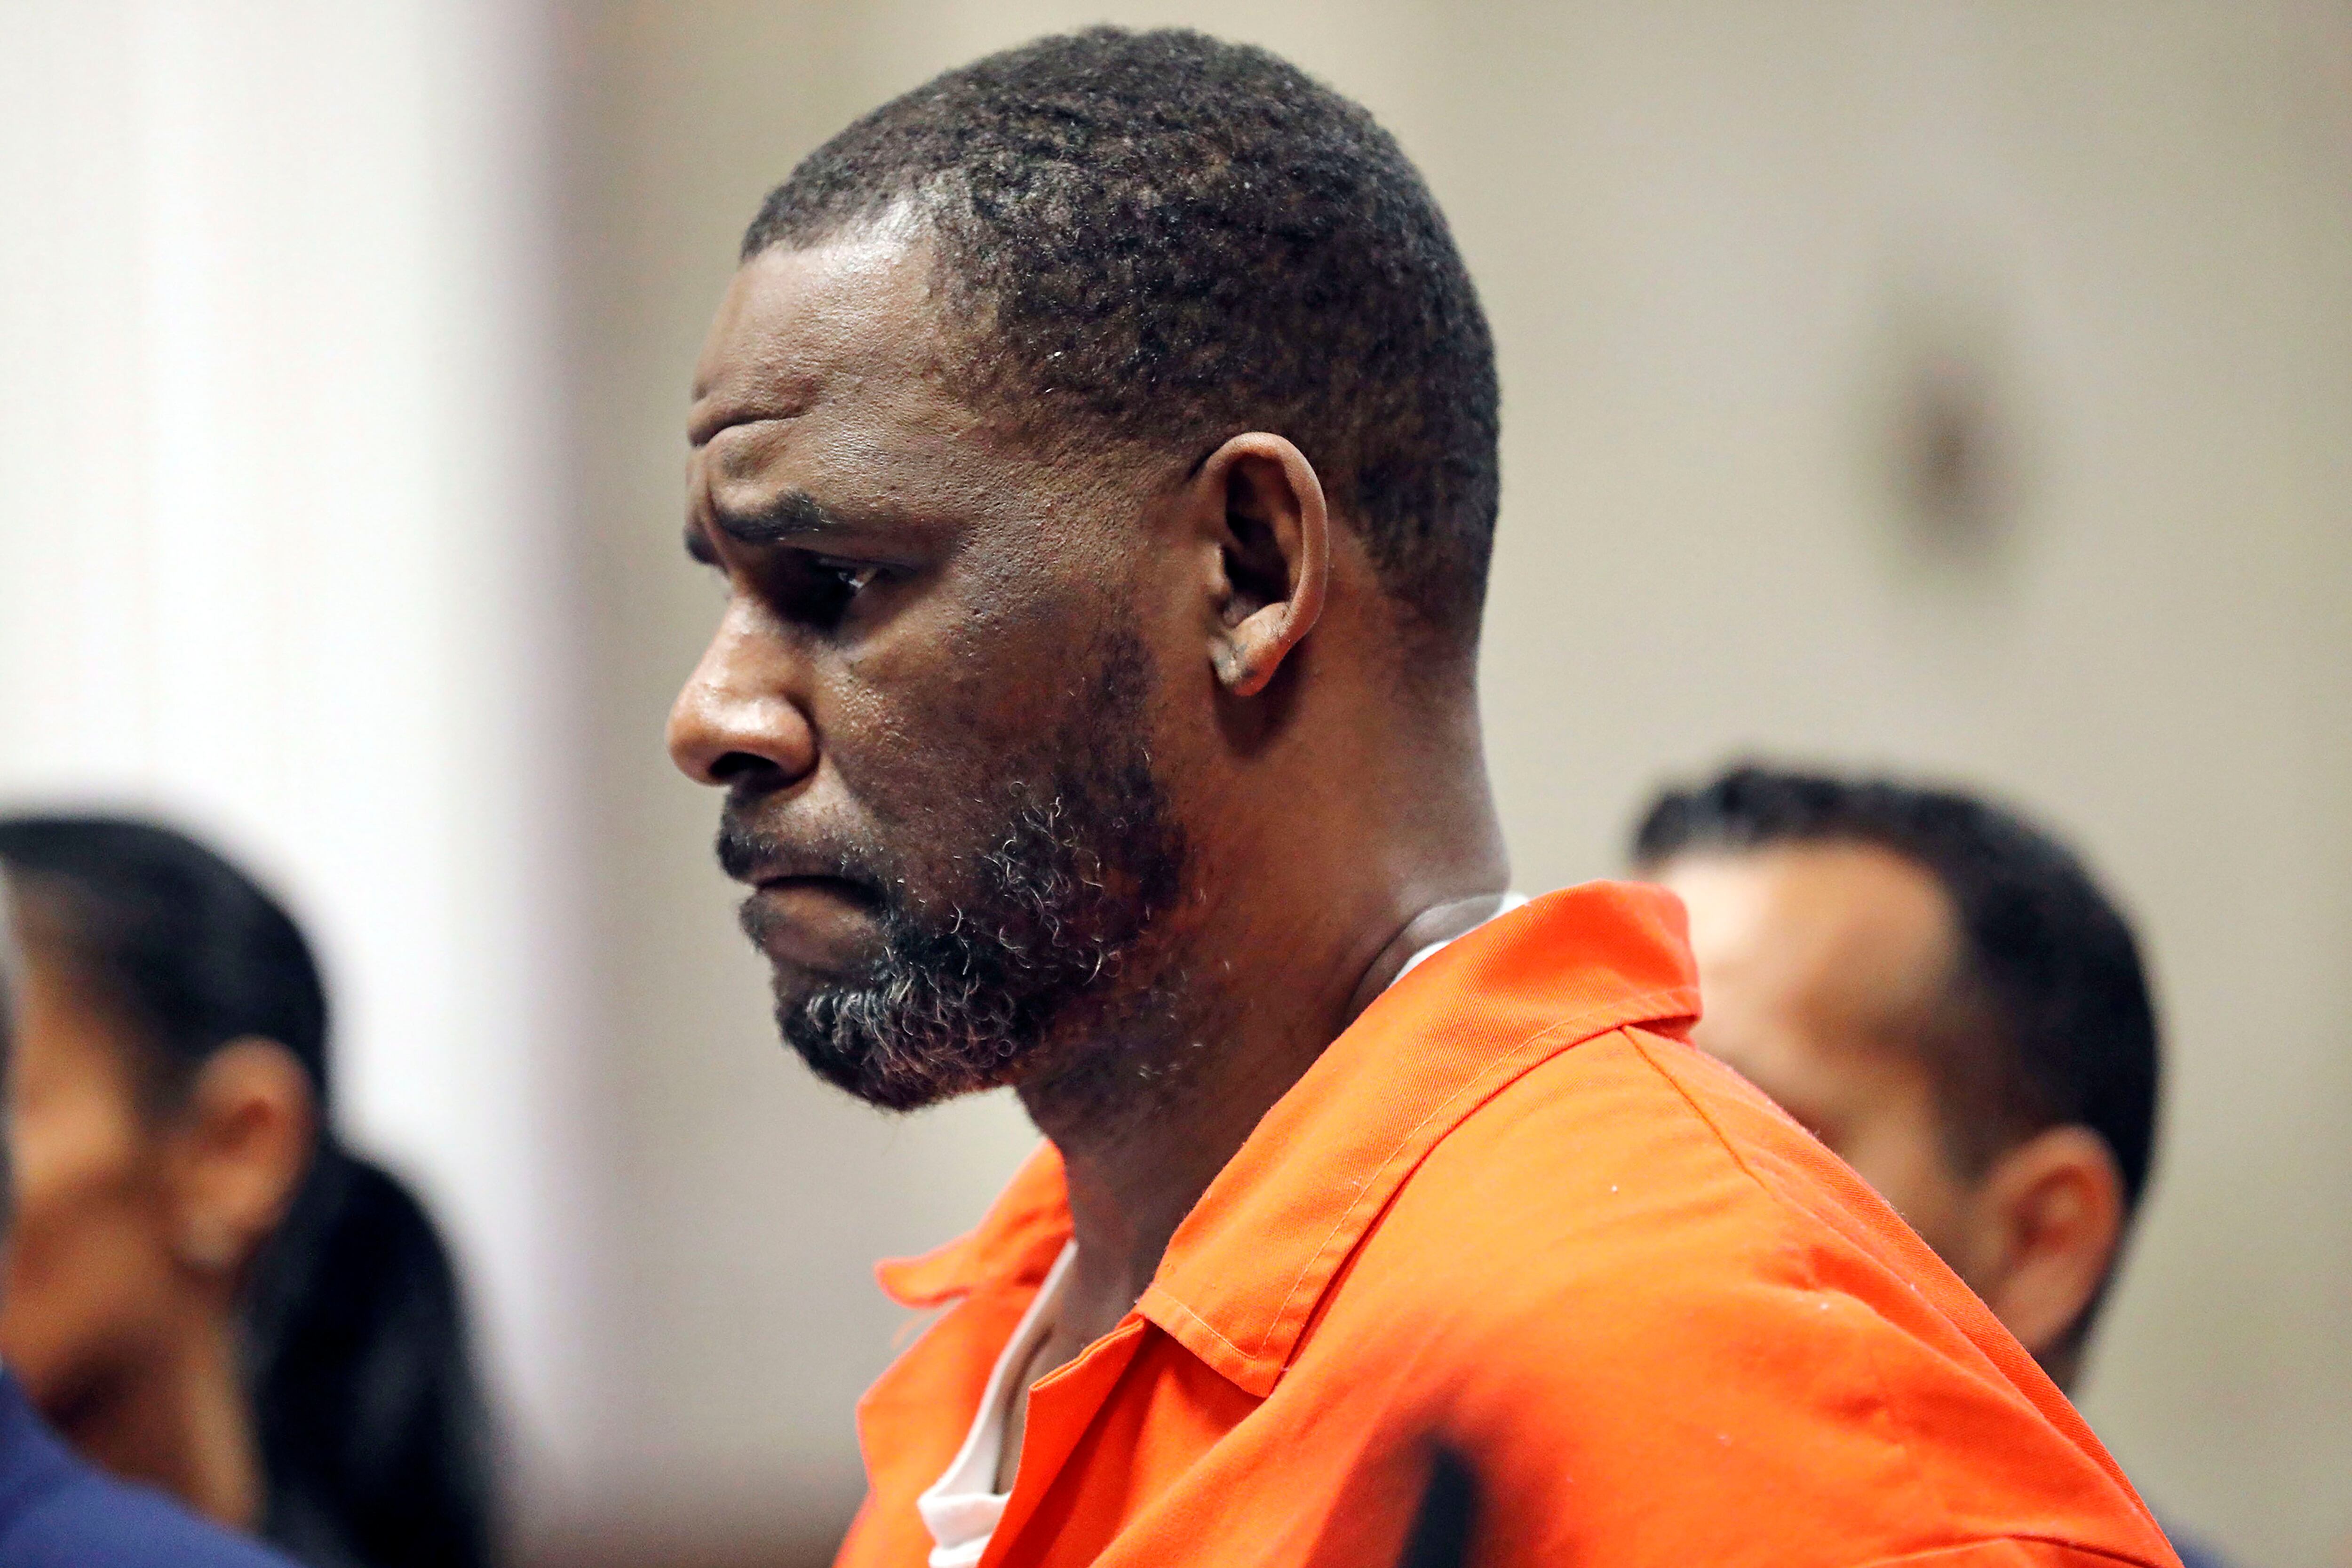 R. Kelly remains on suicide watch ‘for his own safety’